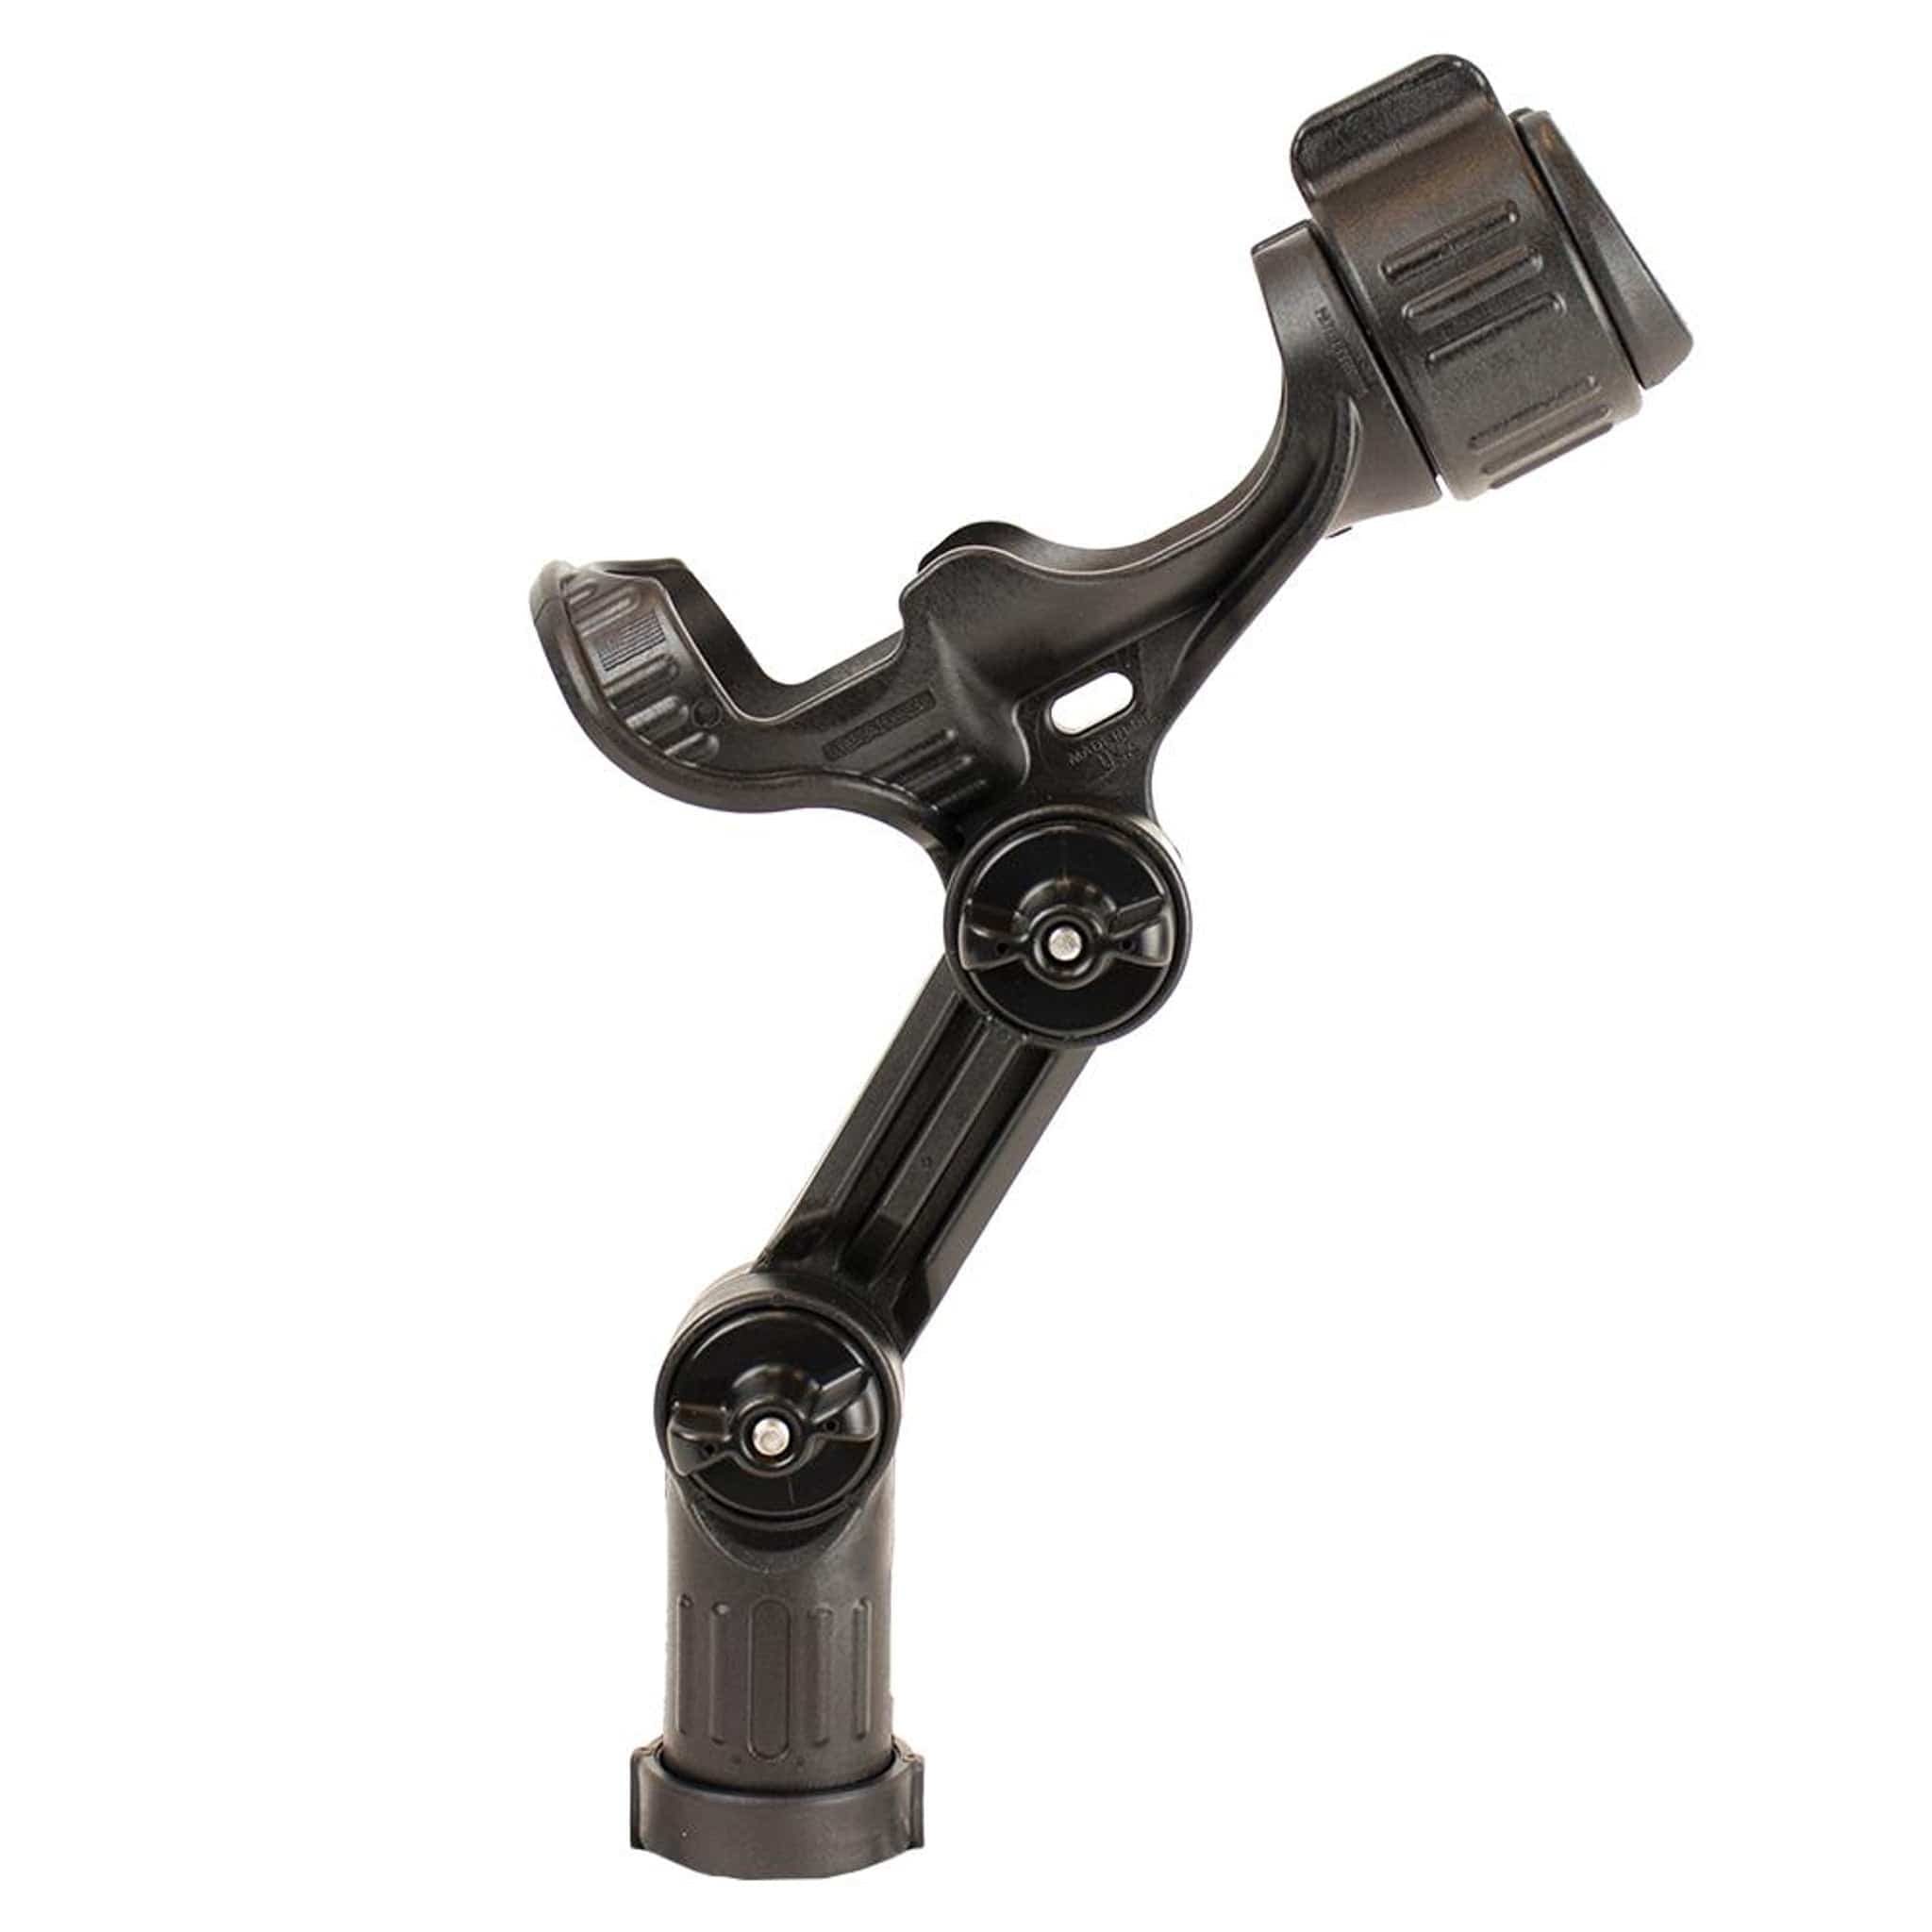 omega-pro-rod-holder-with-track-mounted-locknload-mounting-system-rhm-1002__46887.1648733476.jpg